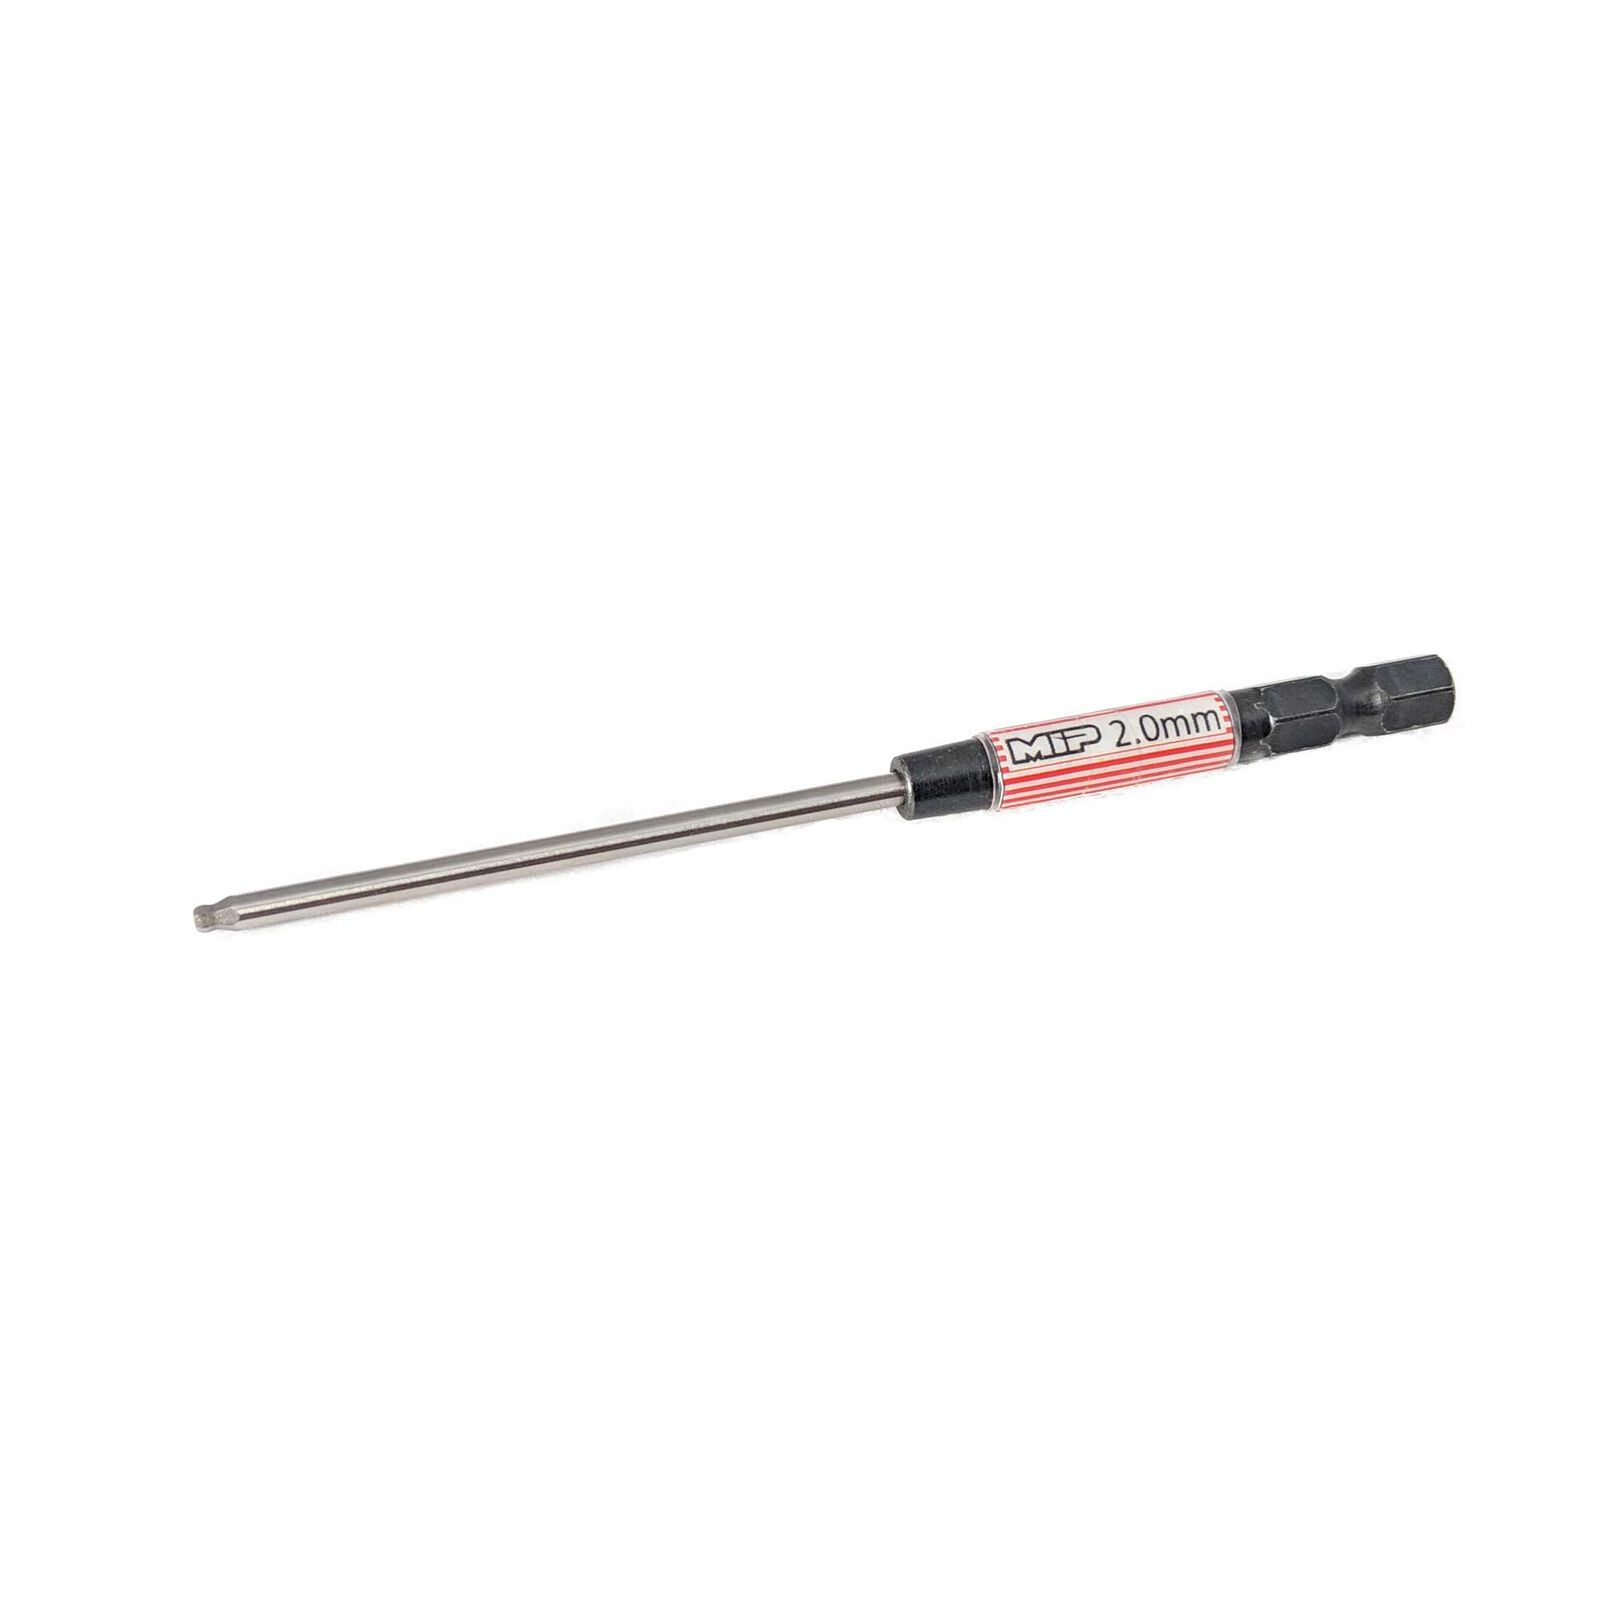 Ball End Speed Tip Hex Driver Wrench: 2.0mm